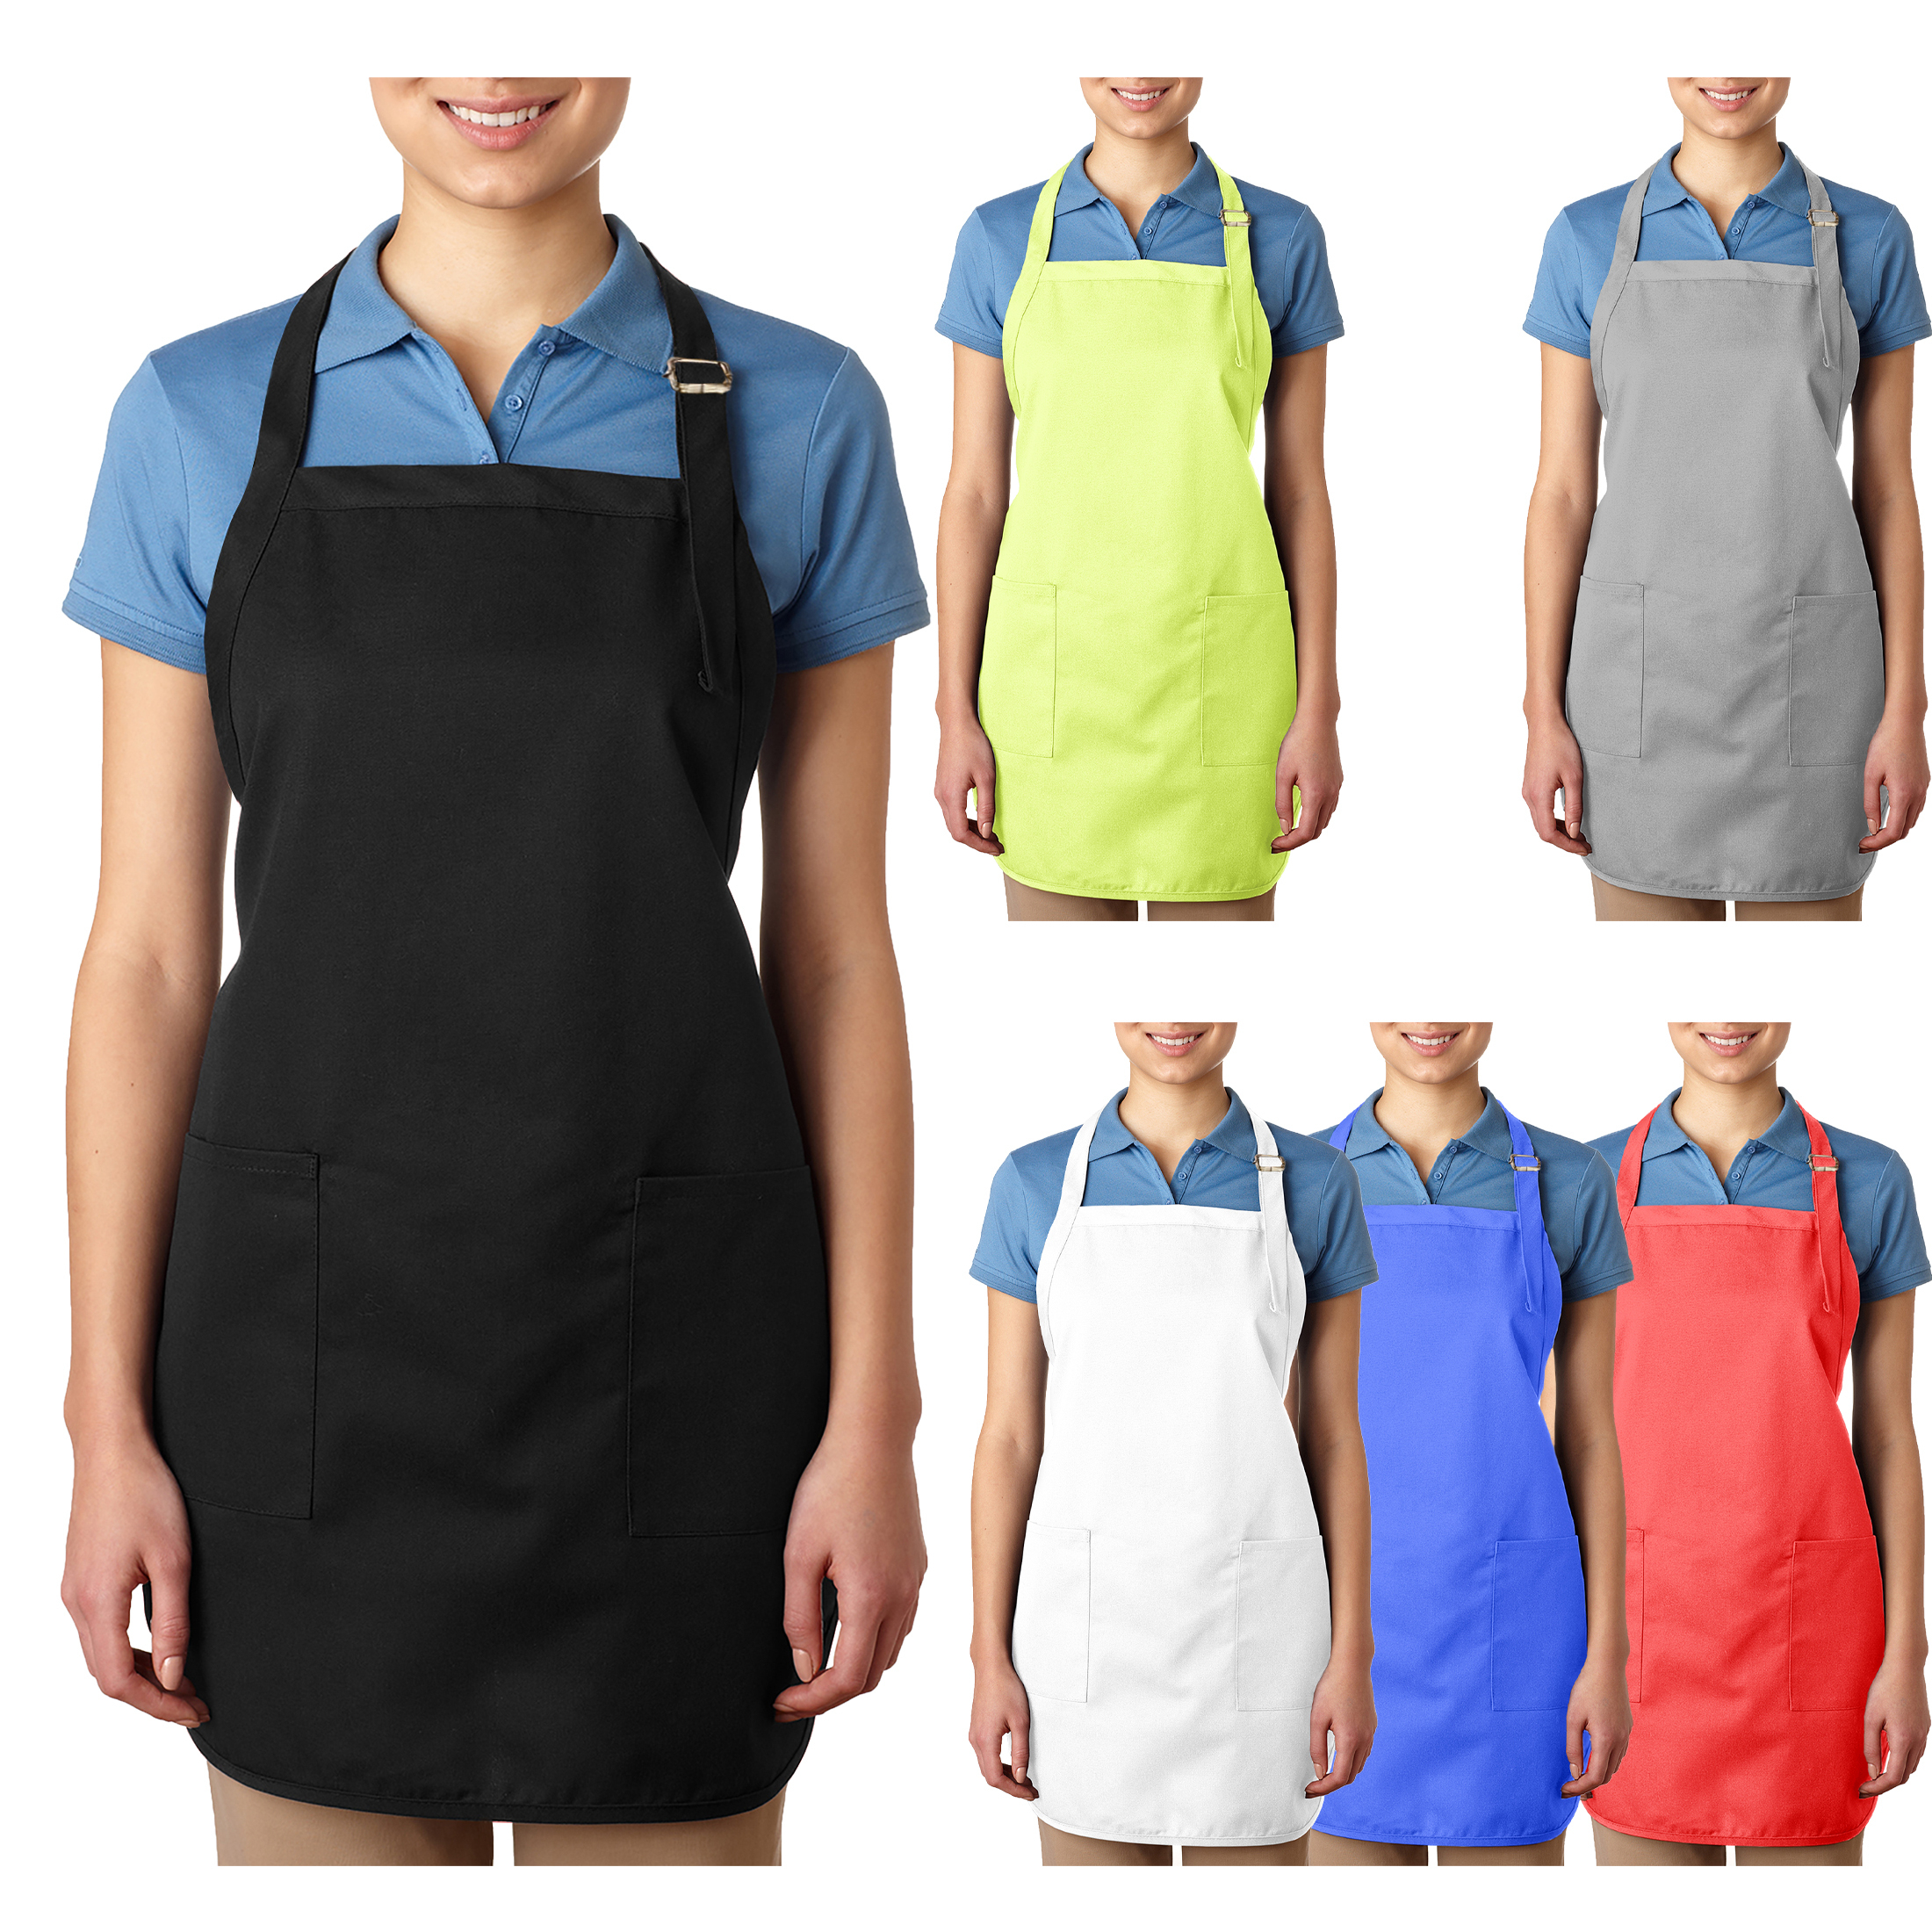 Multi-pack Unisex Deluxe Adjustable Bib Apron With Pockets - 2-Pack